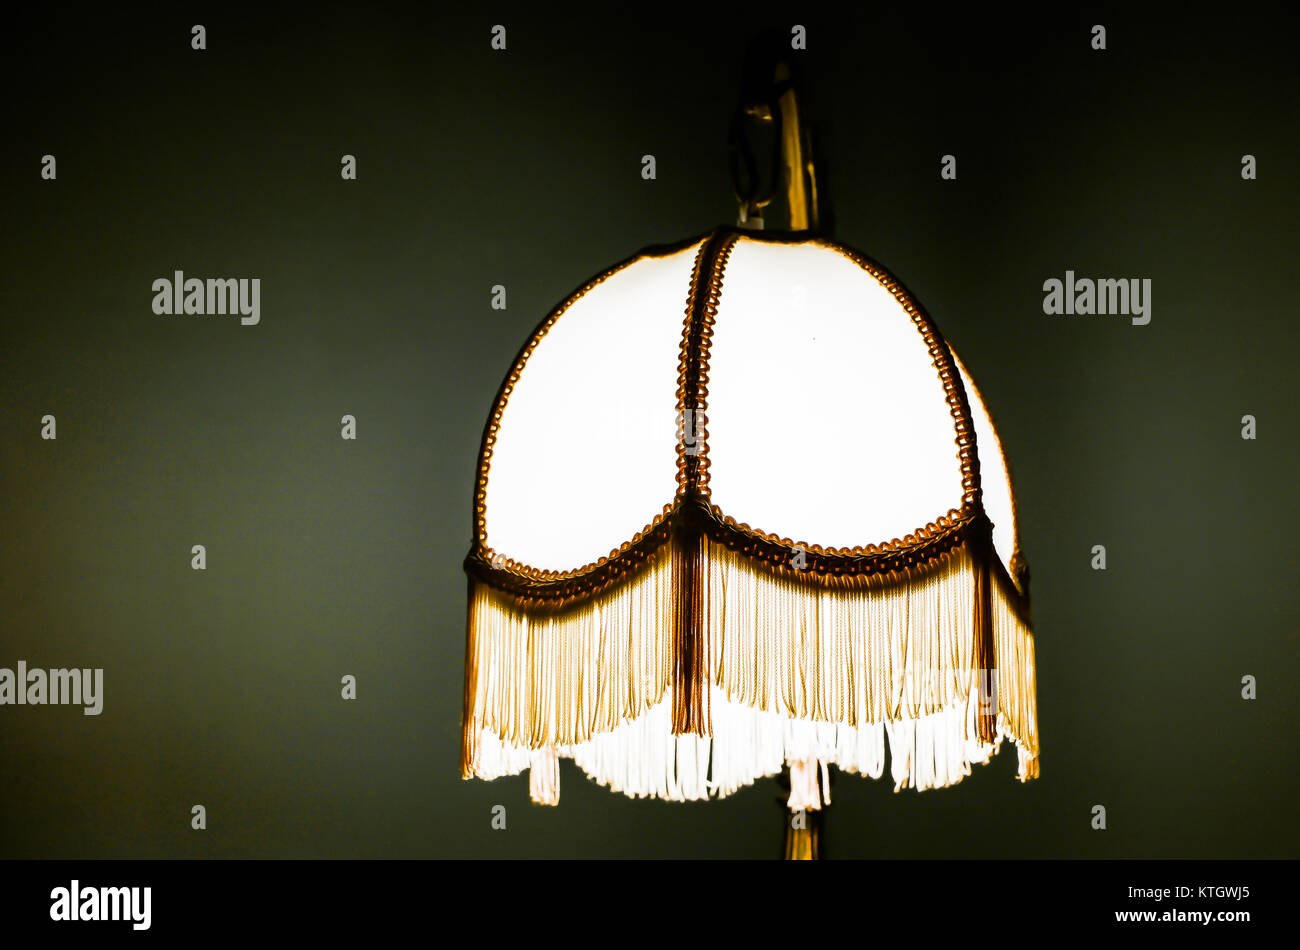 Interior high contrast stock photo of bright antique lamp isolated against olive background Stock Photo